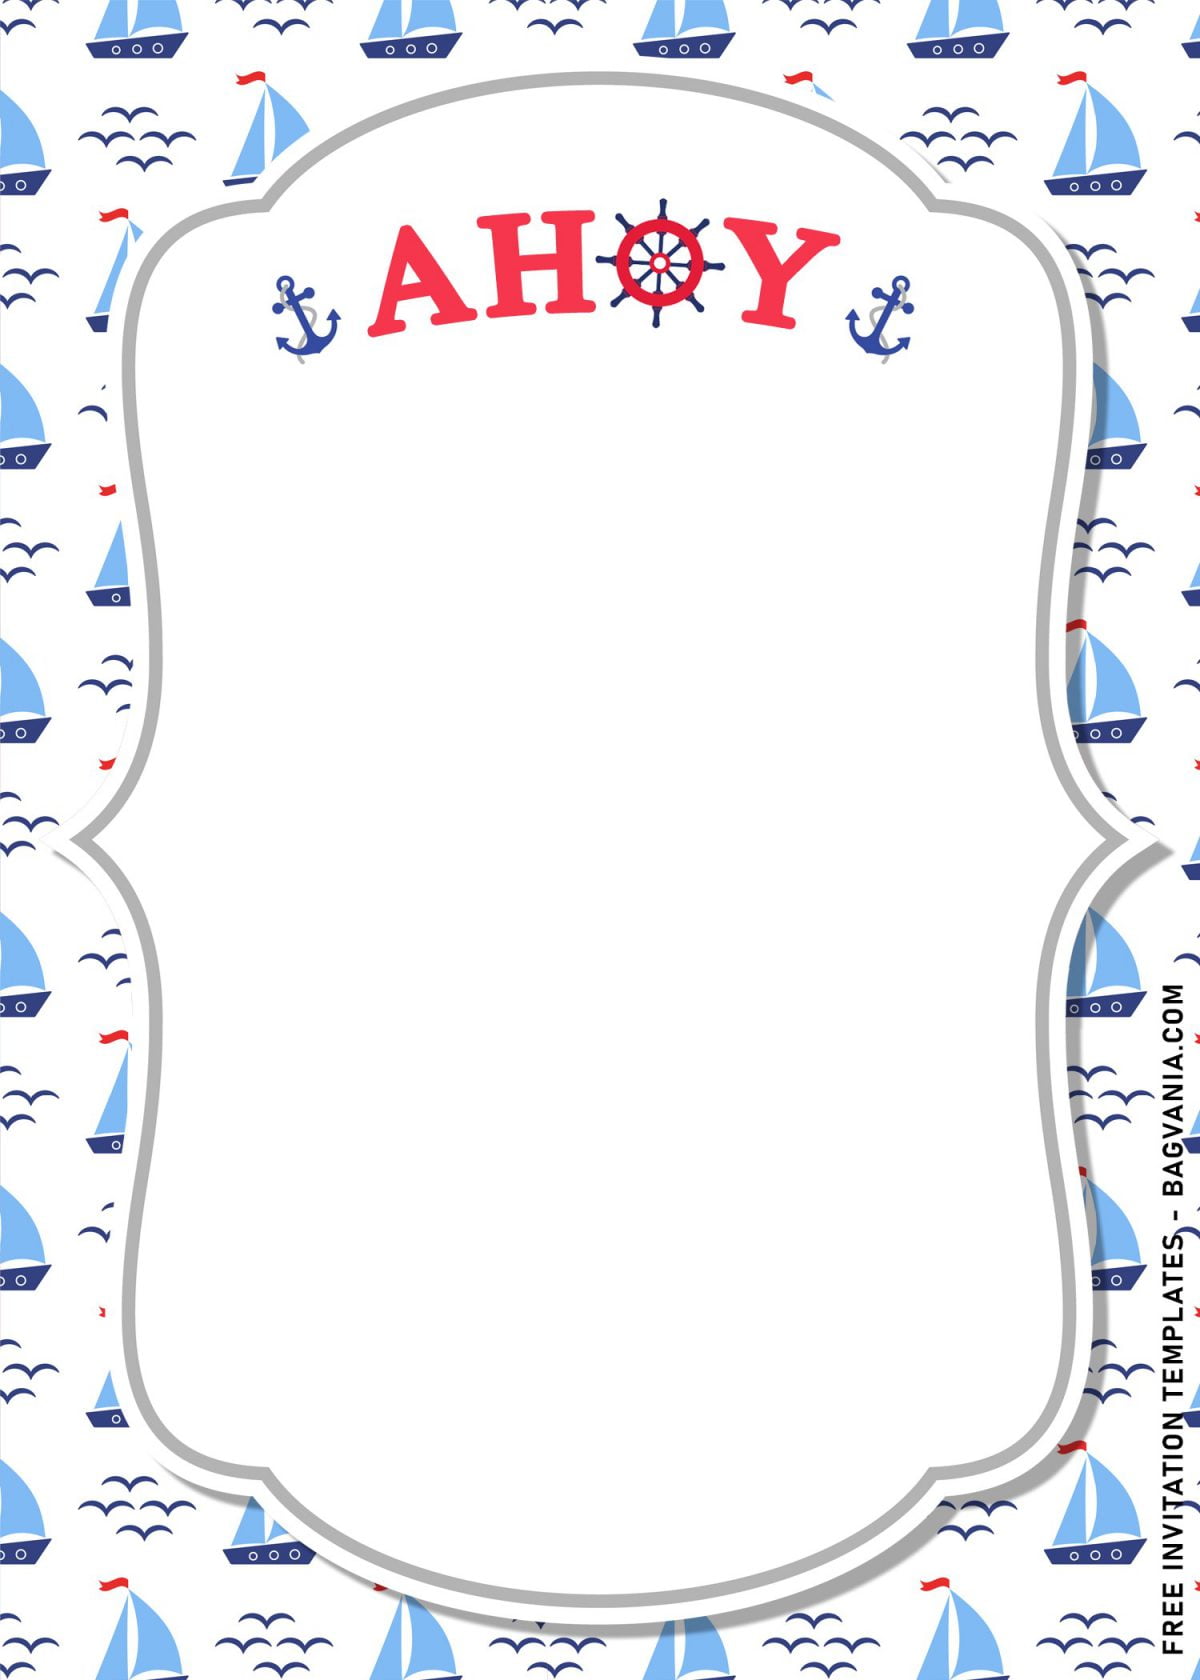 11+ Nautical Themed Birthday Invitation Templates For Your Kid’s Birthday Bash and has bracket frame painted in white